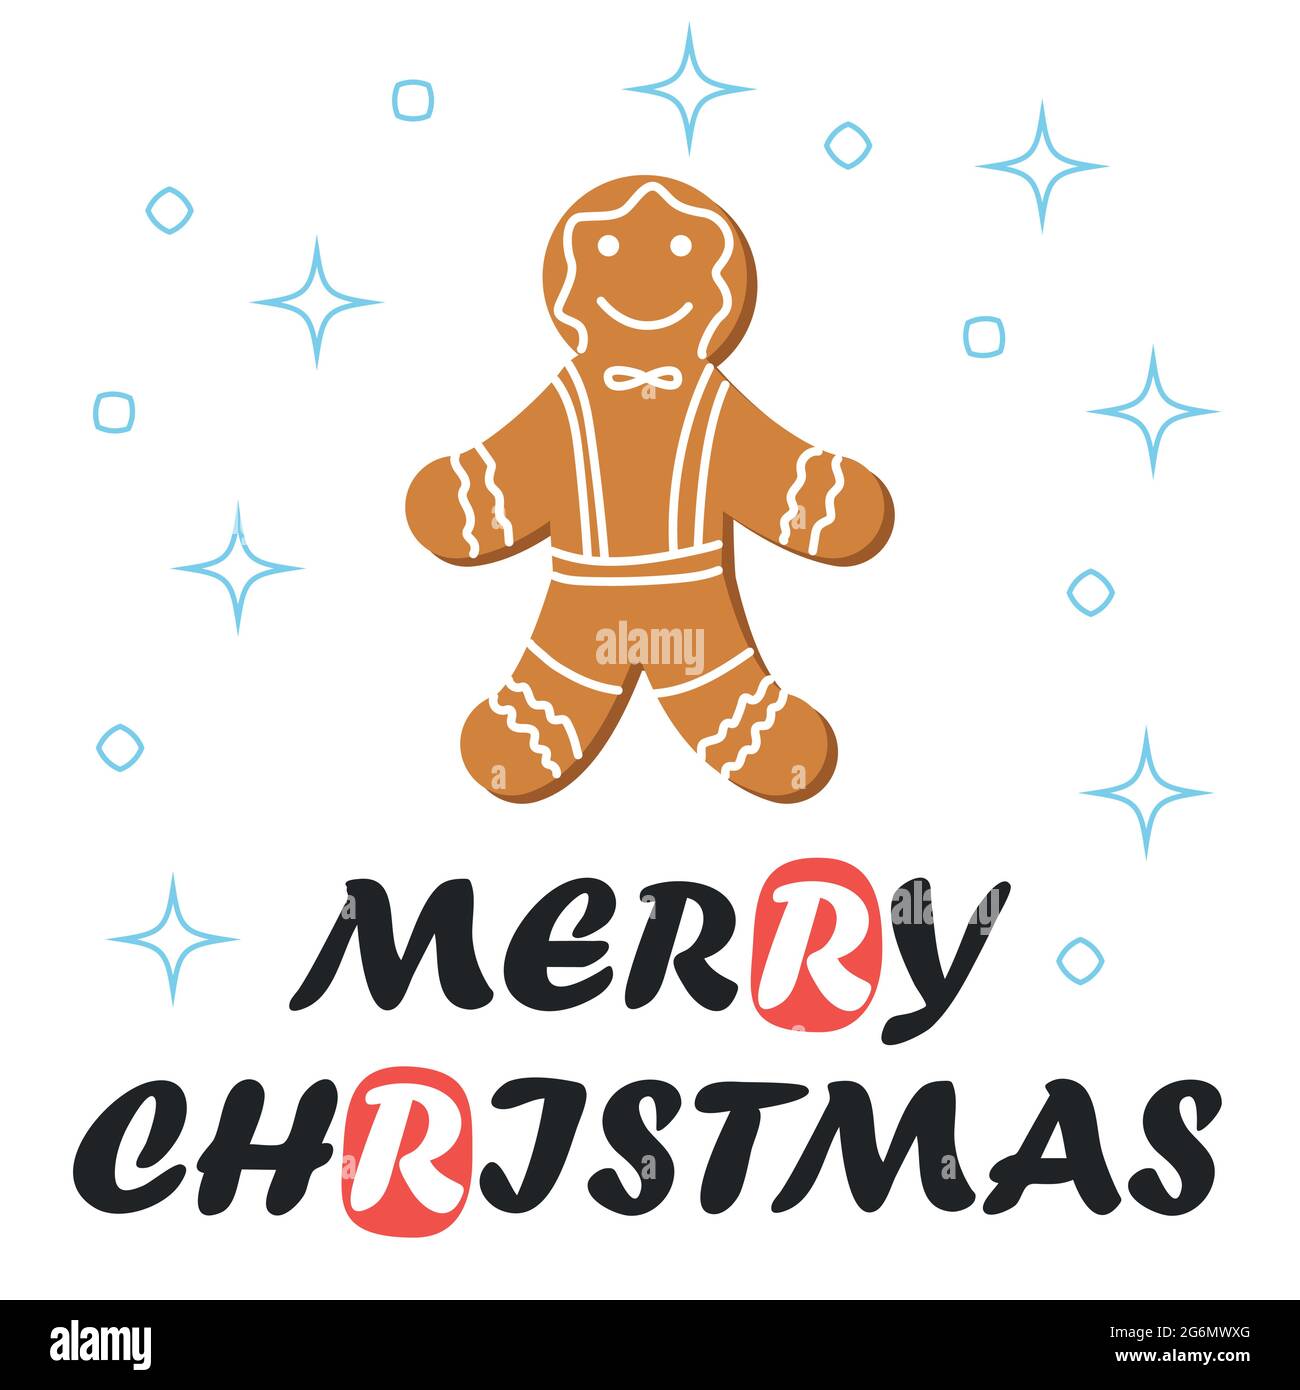 Christmas and New Year's minimal simple postcard with gingerbread man and greeting text. Stock Vector